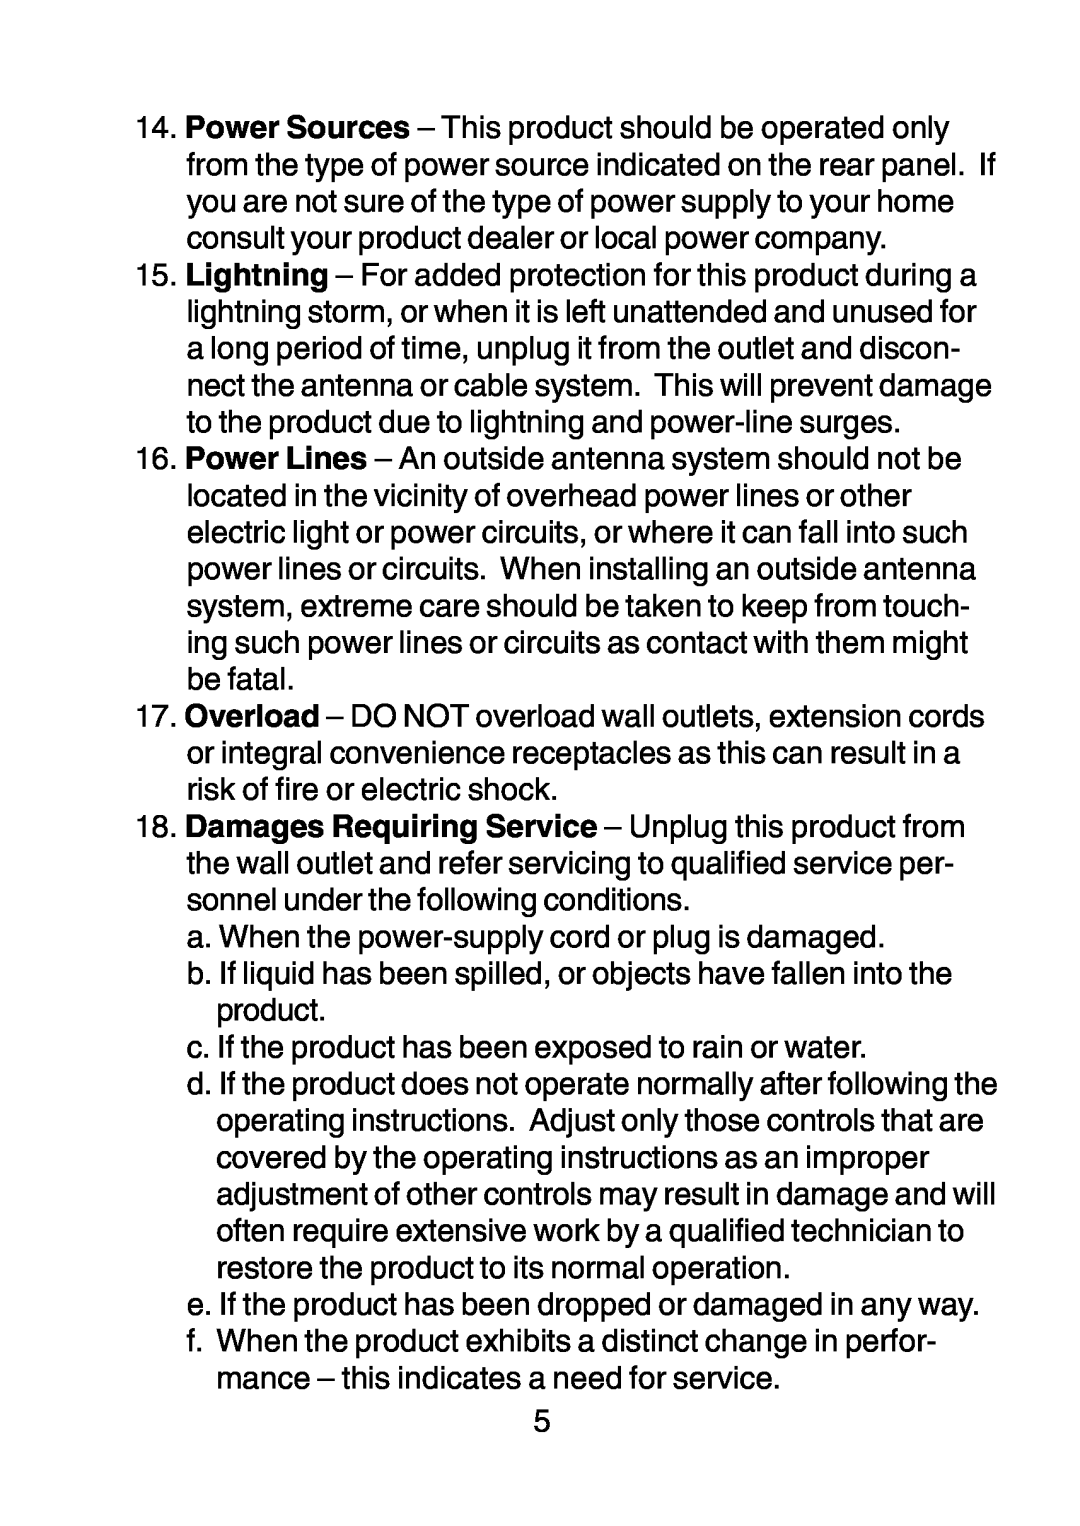 Audiovox D1210 owner manual a. When the power-supply cord or plug is damaged 